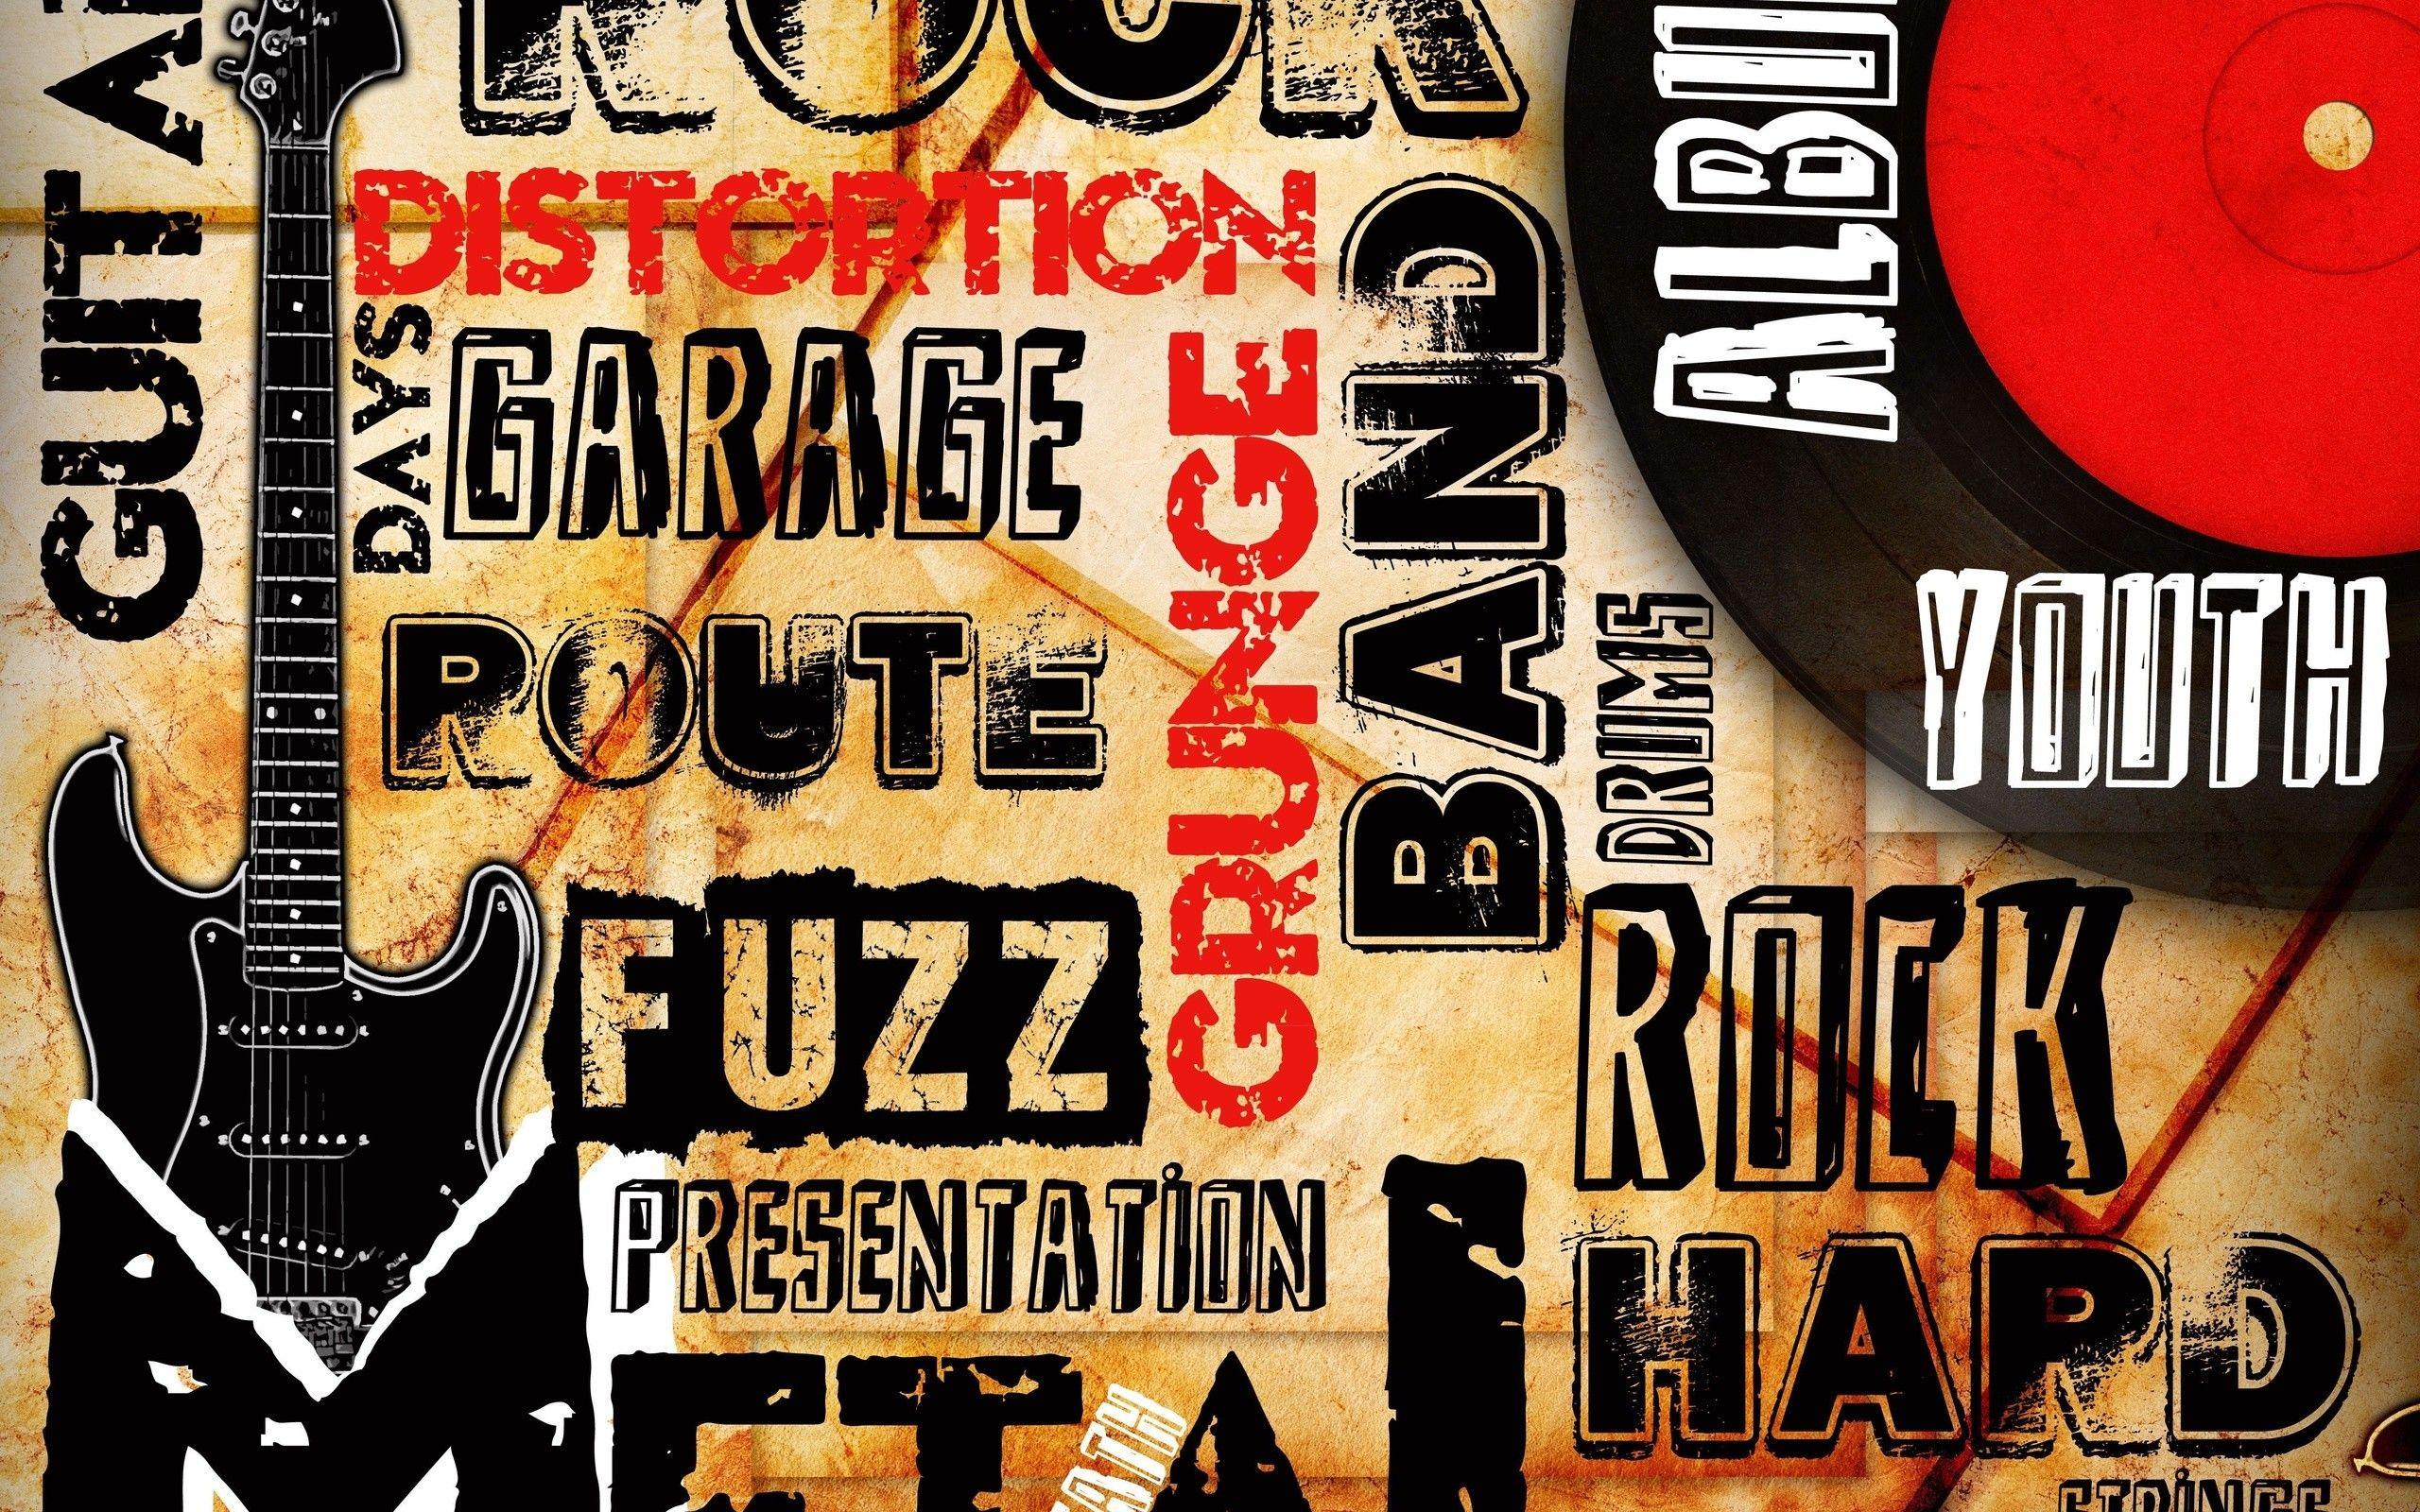 Rock music wallpaper with a guitar and music related words - Rock